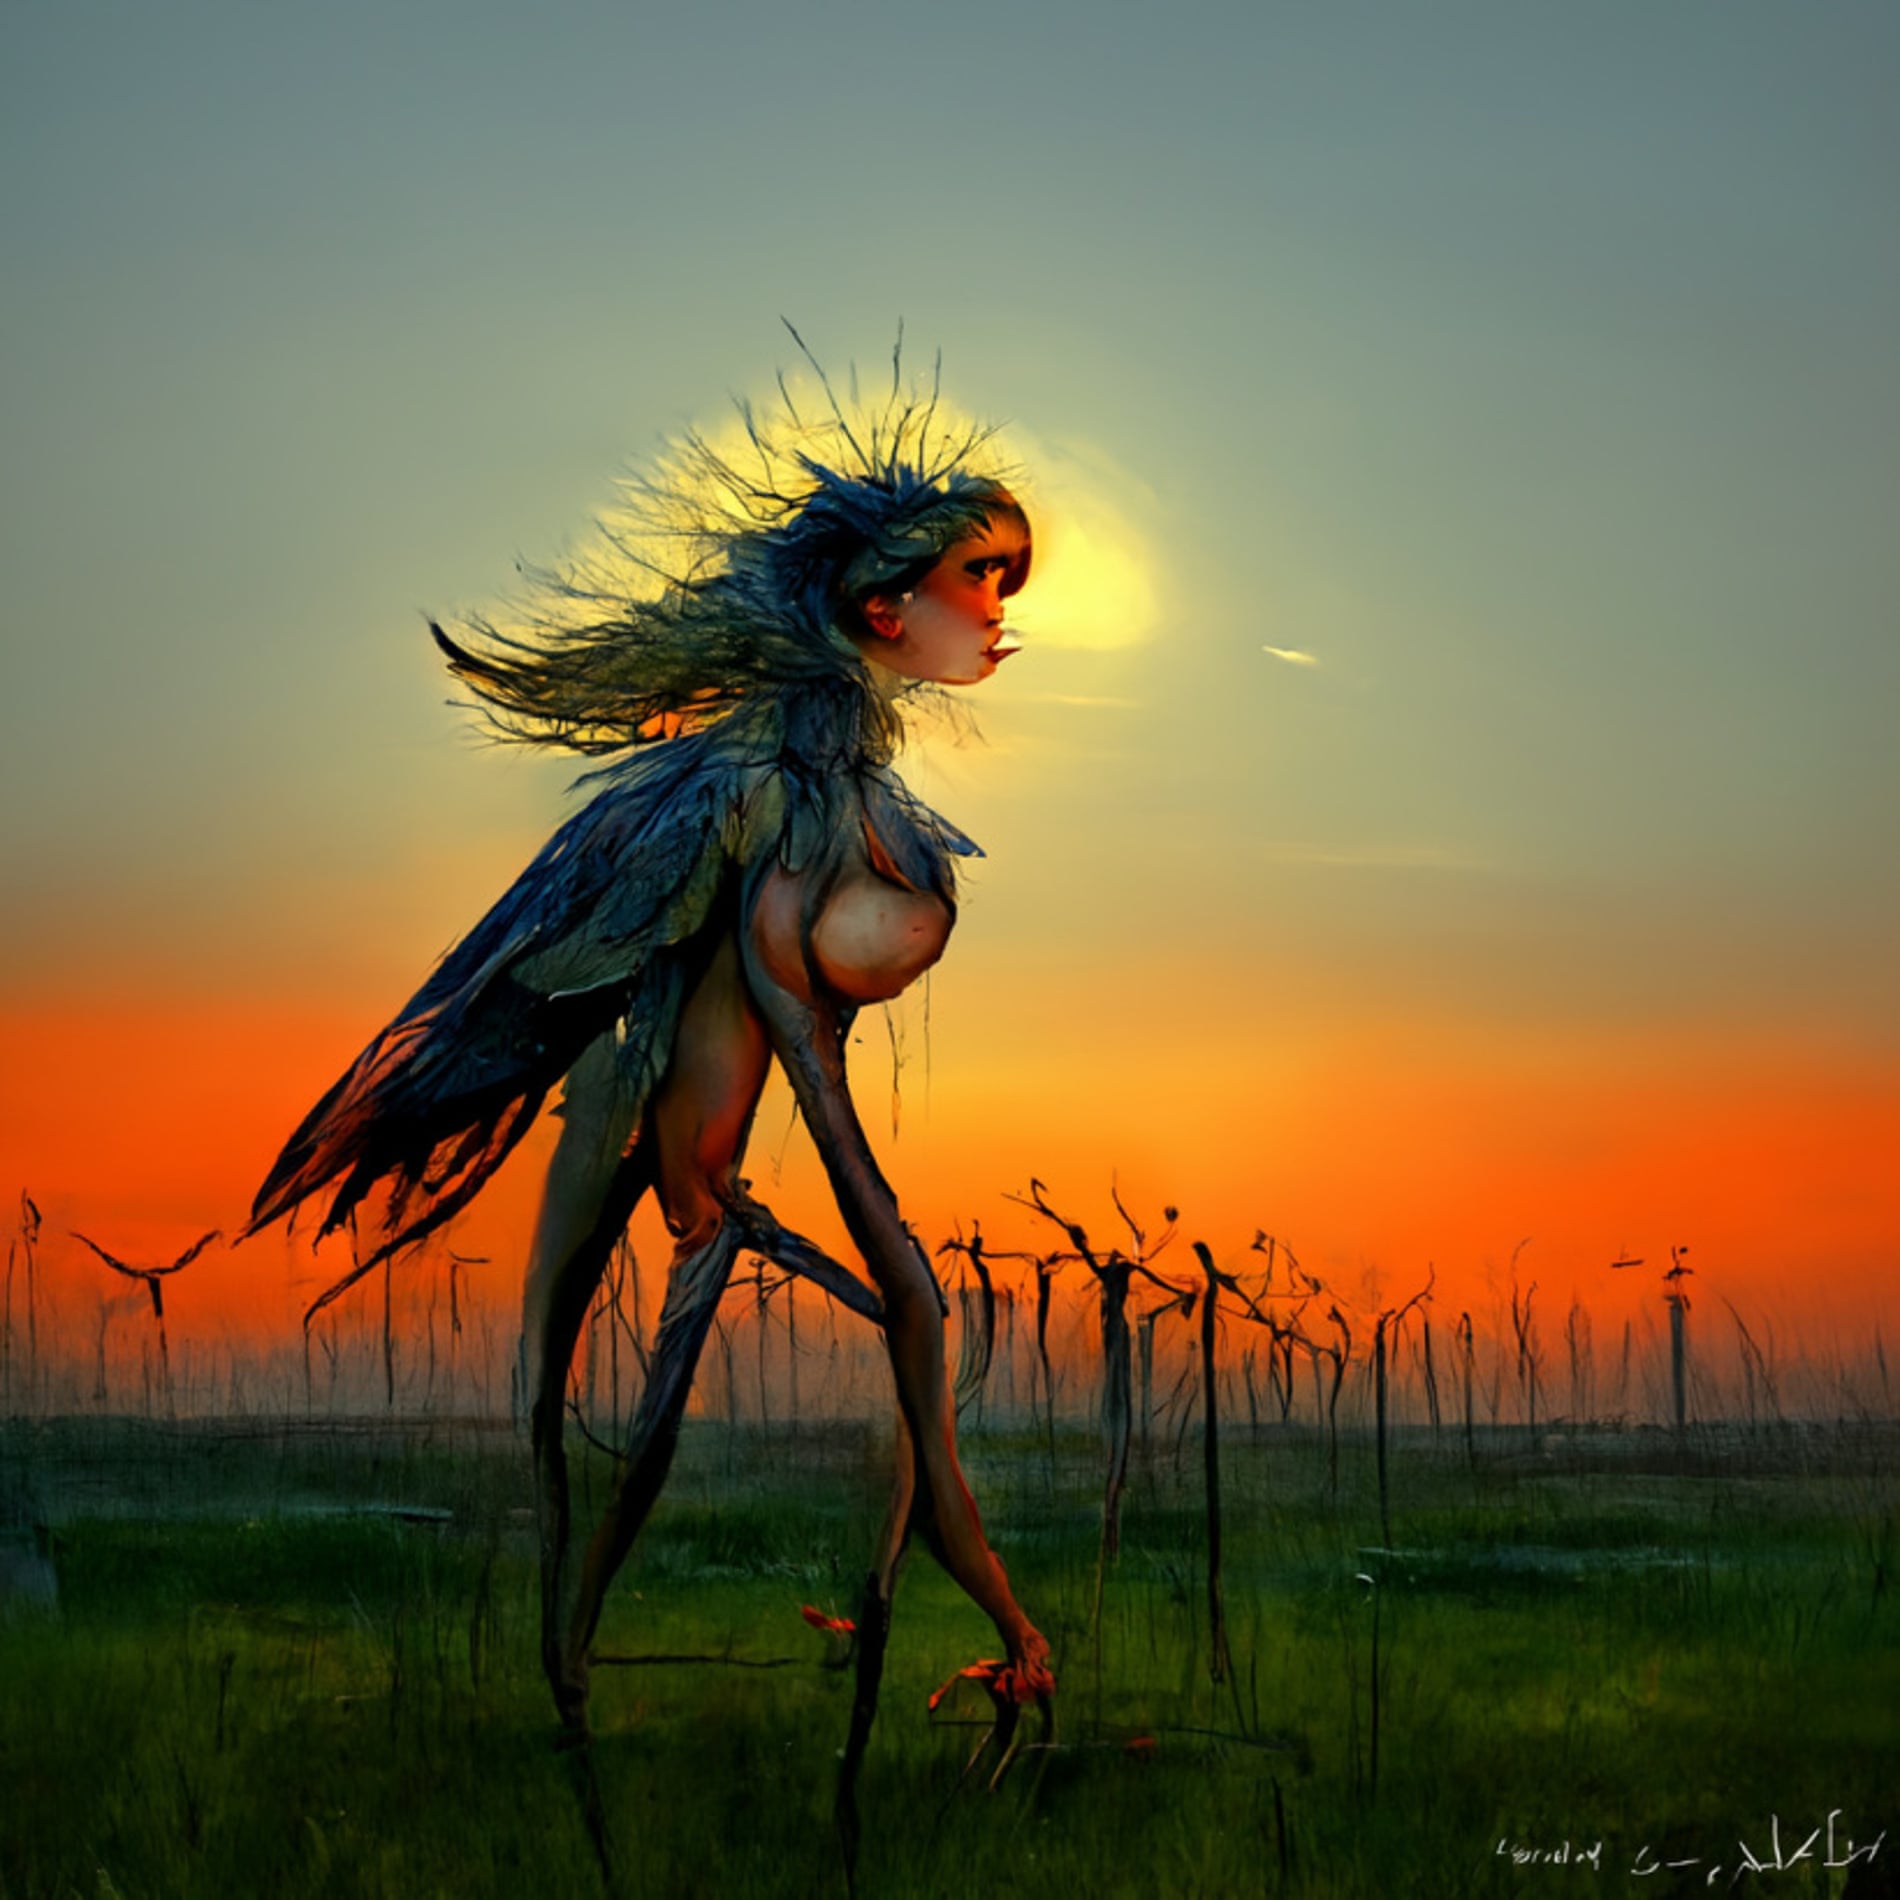 image of a figure with wings walking among what looks like dead trees. the image looks more like a painting